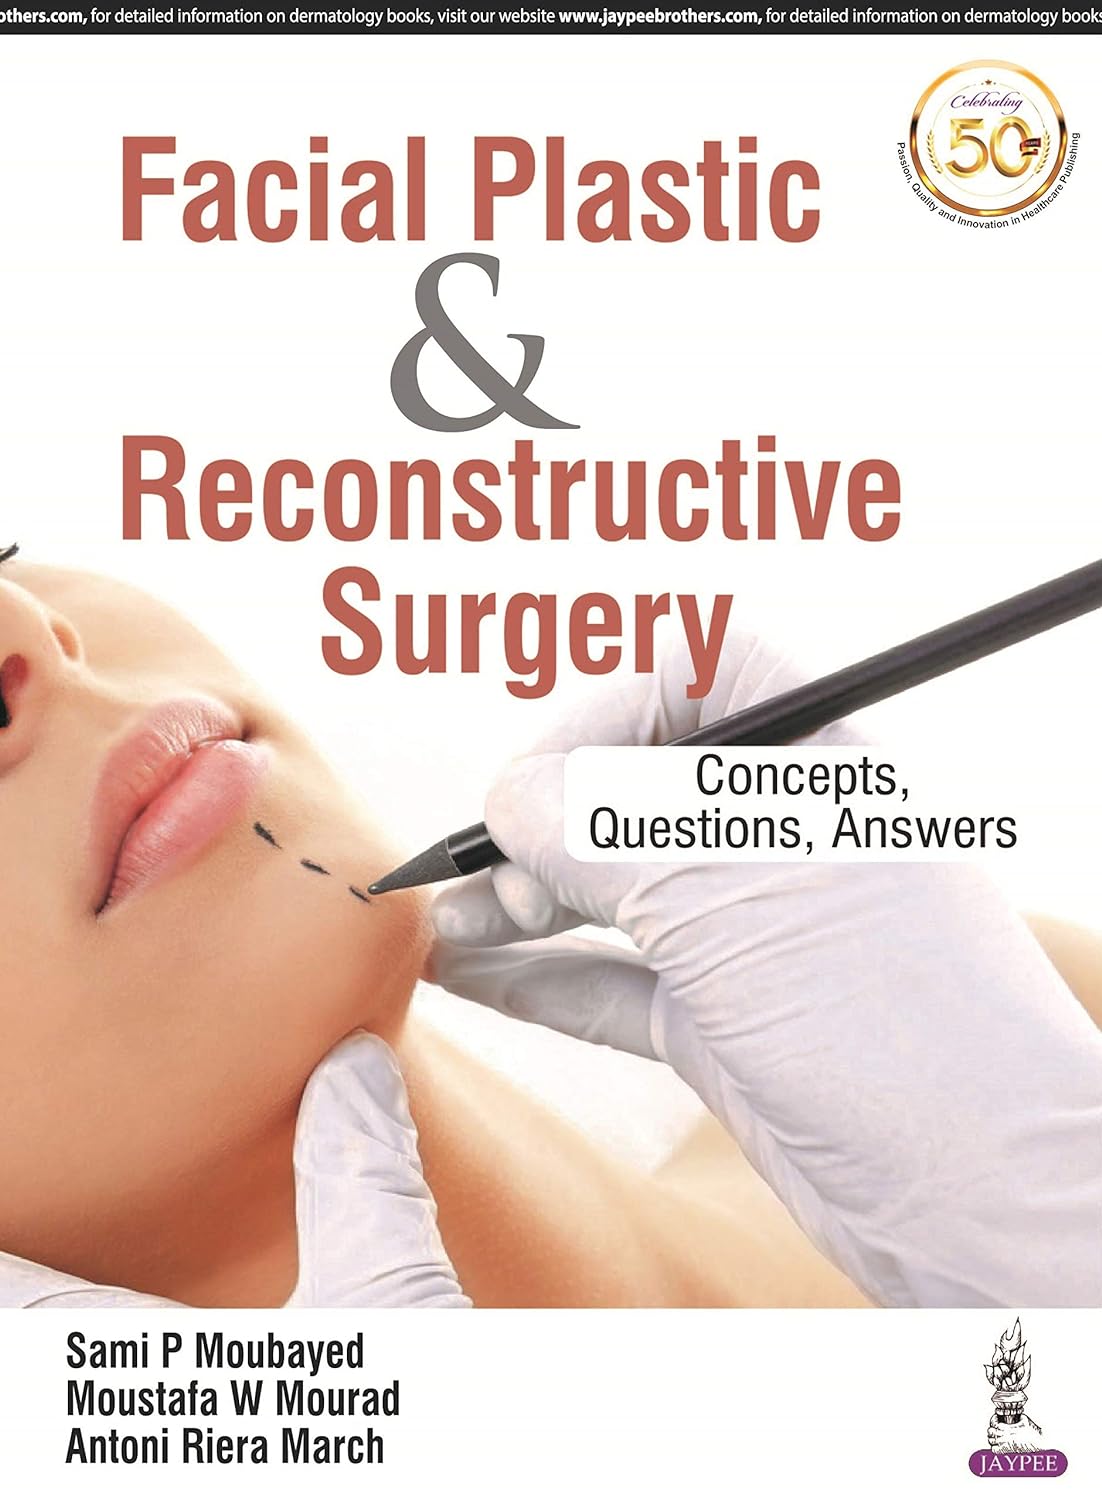 Facial Plastic and Reconstructive Surgery Concepts, Questions, Answers 1st Edition